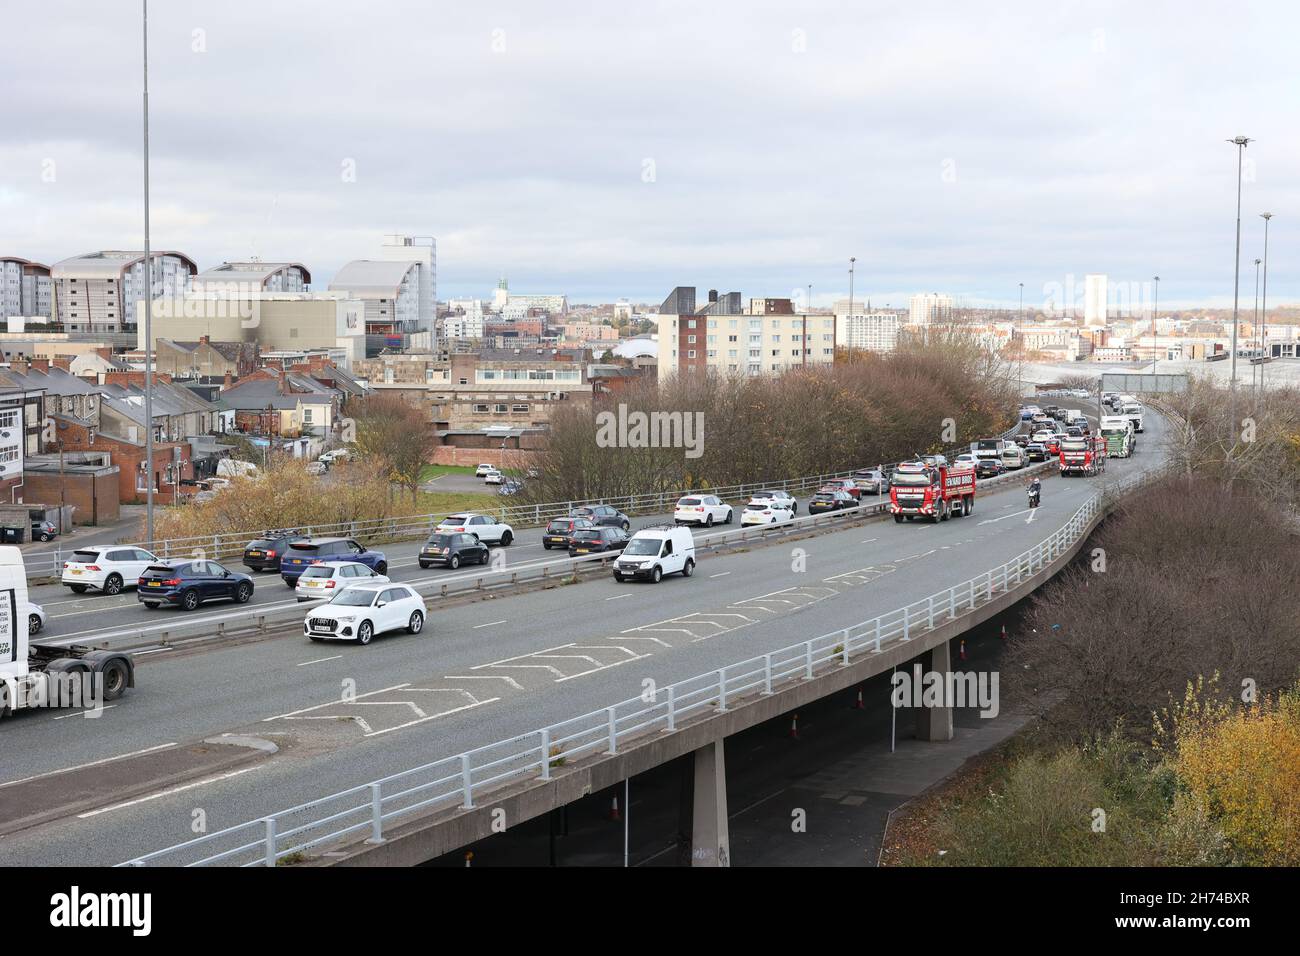 Gateshead UK: 20th Nov 2021: Newcastle Gateshead truckers protesting fuel prices in a go-slow drive through city centre with Police escort. View from highrise tower block Stock Photo